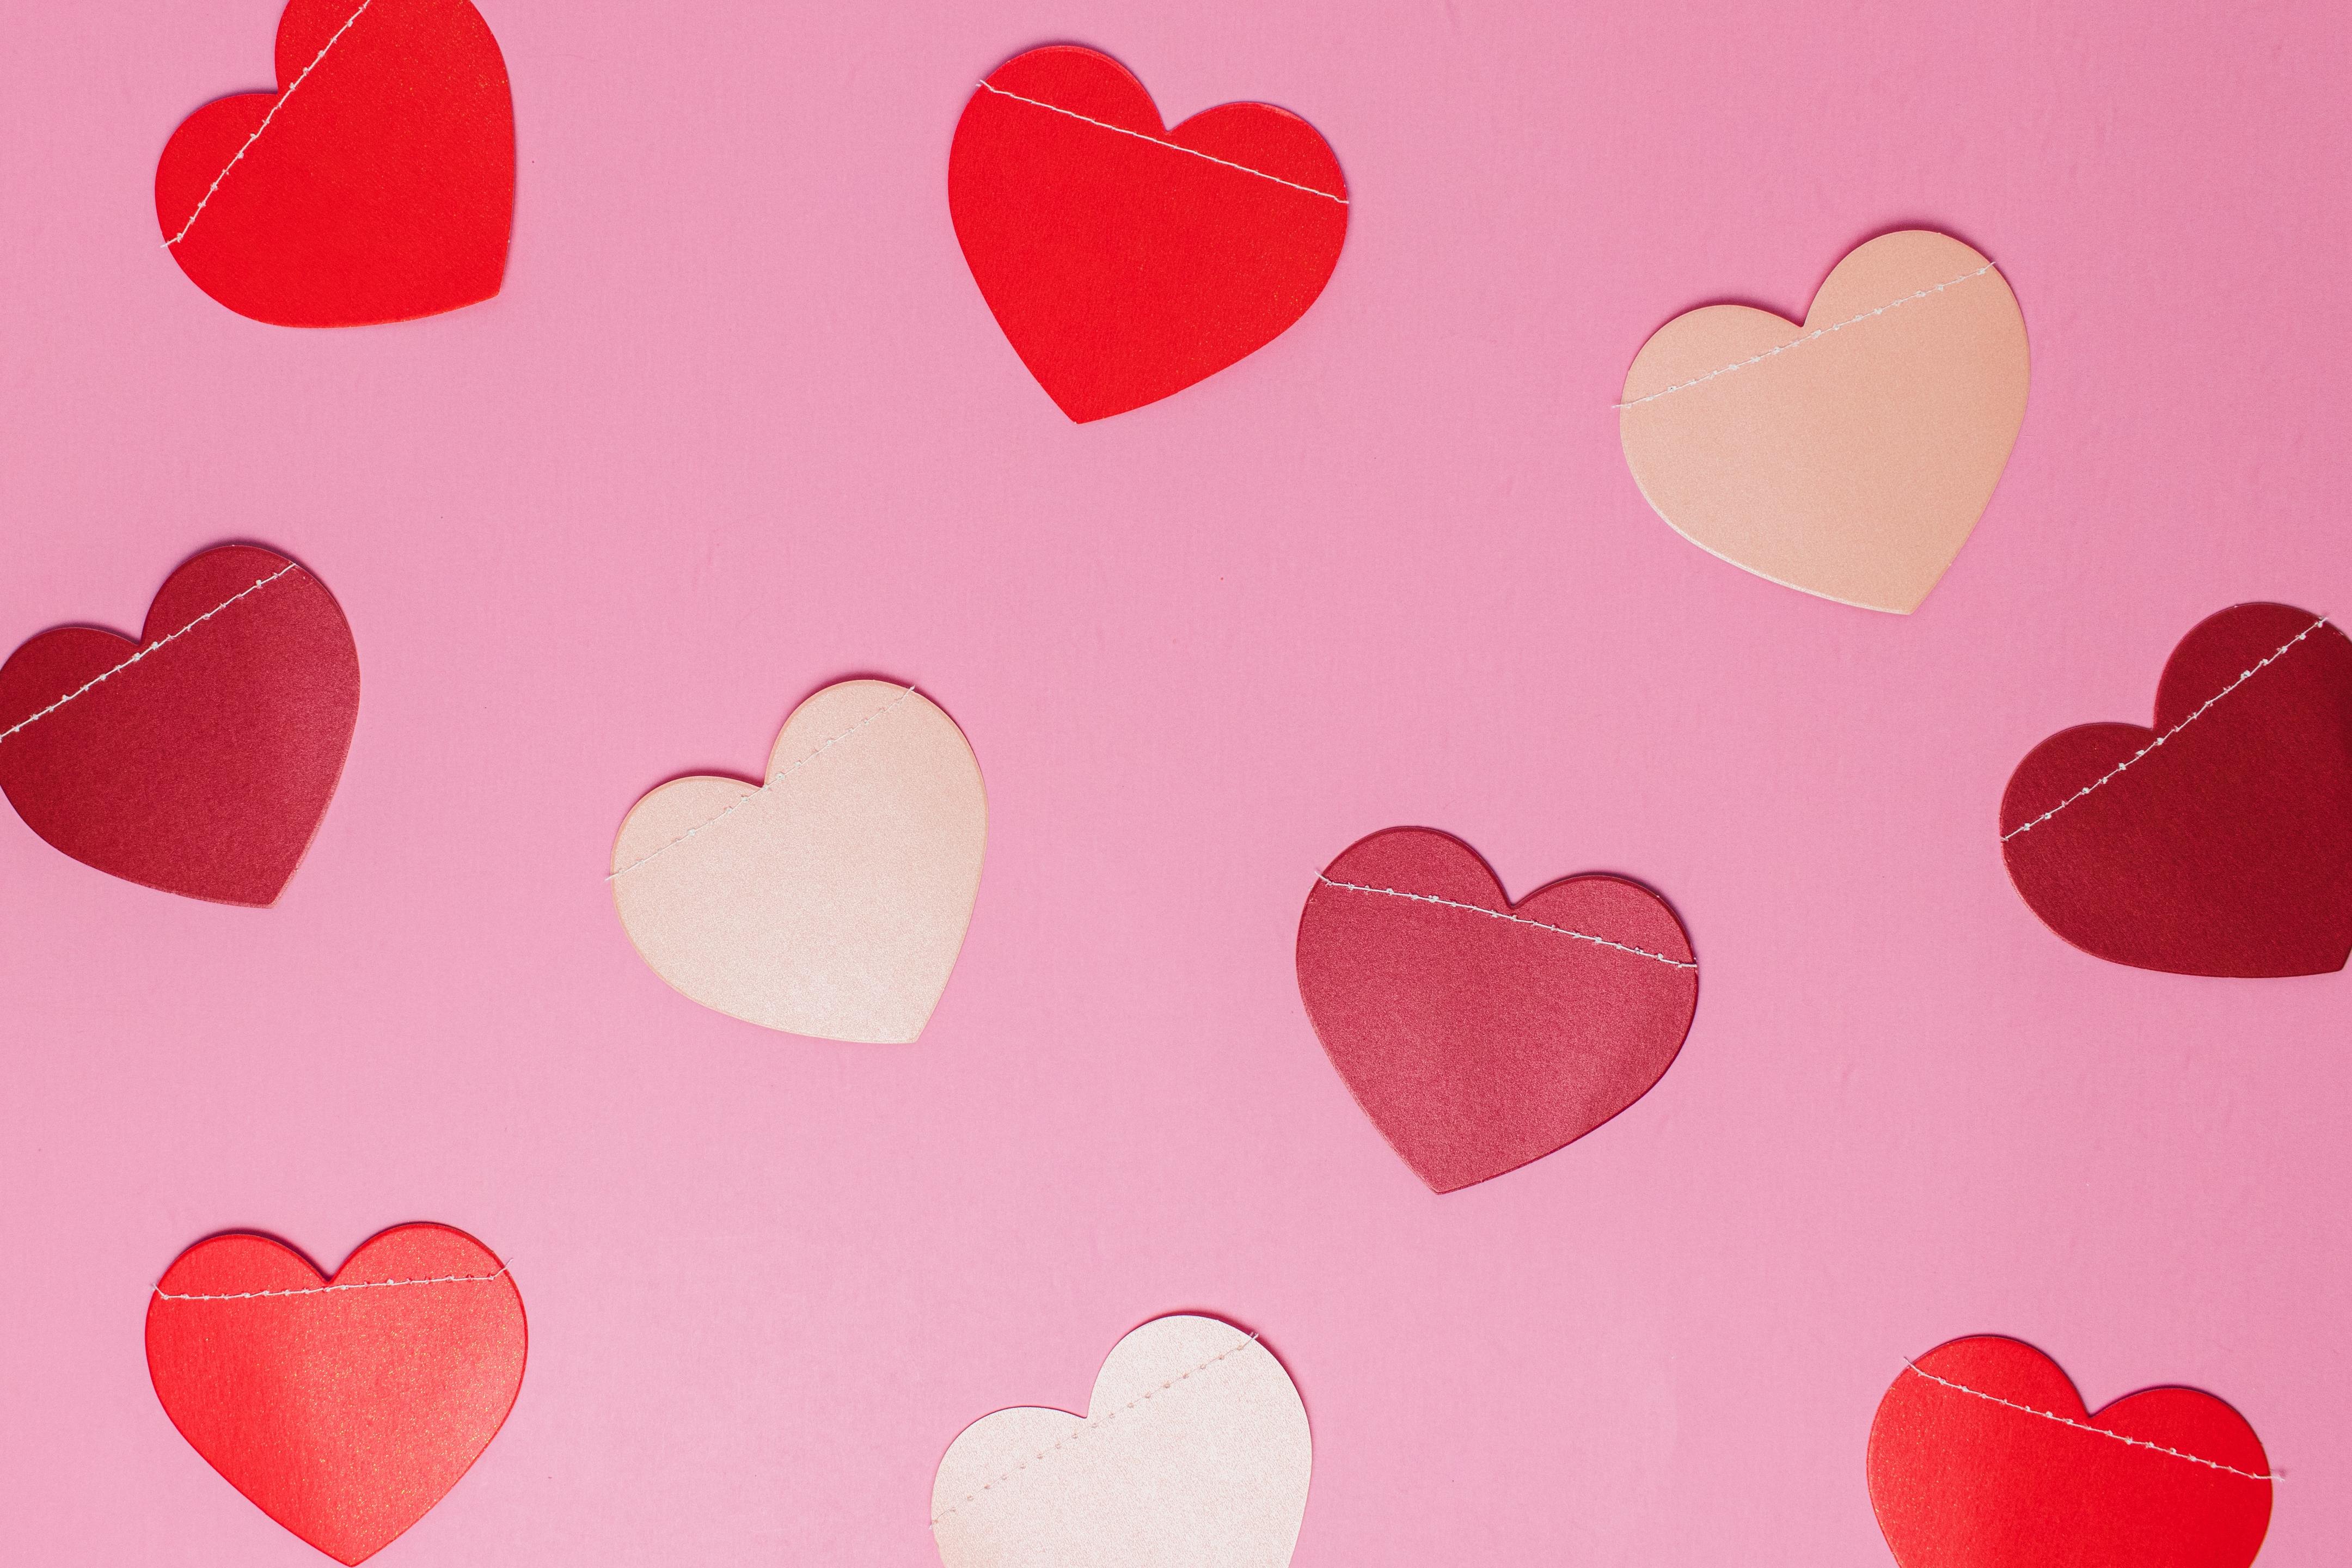 Six Lockdown ways to fill your St. Valentine's Day with Love